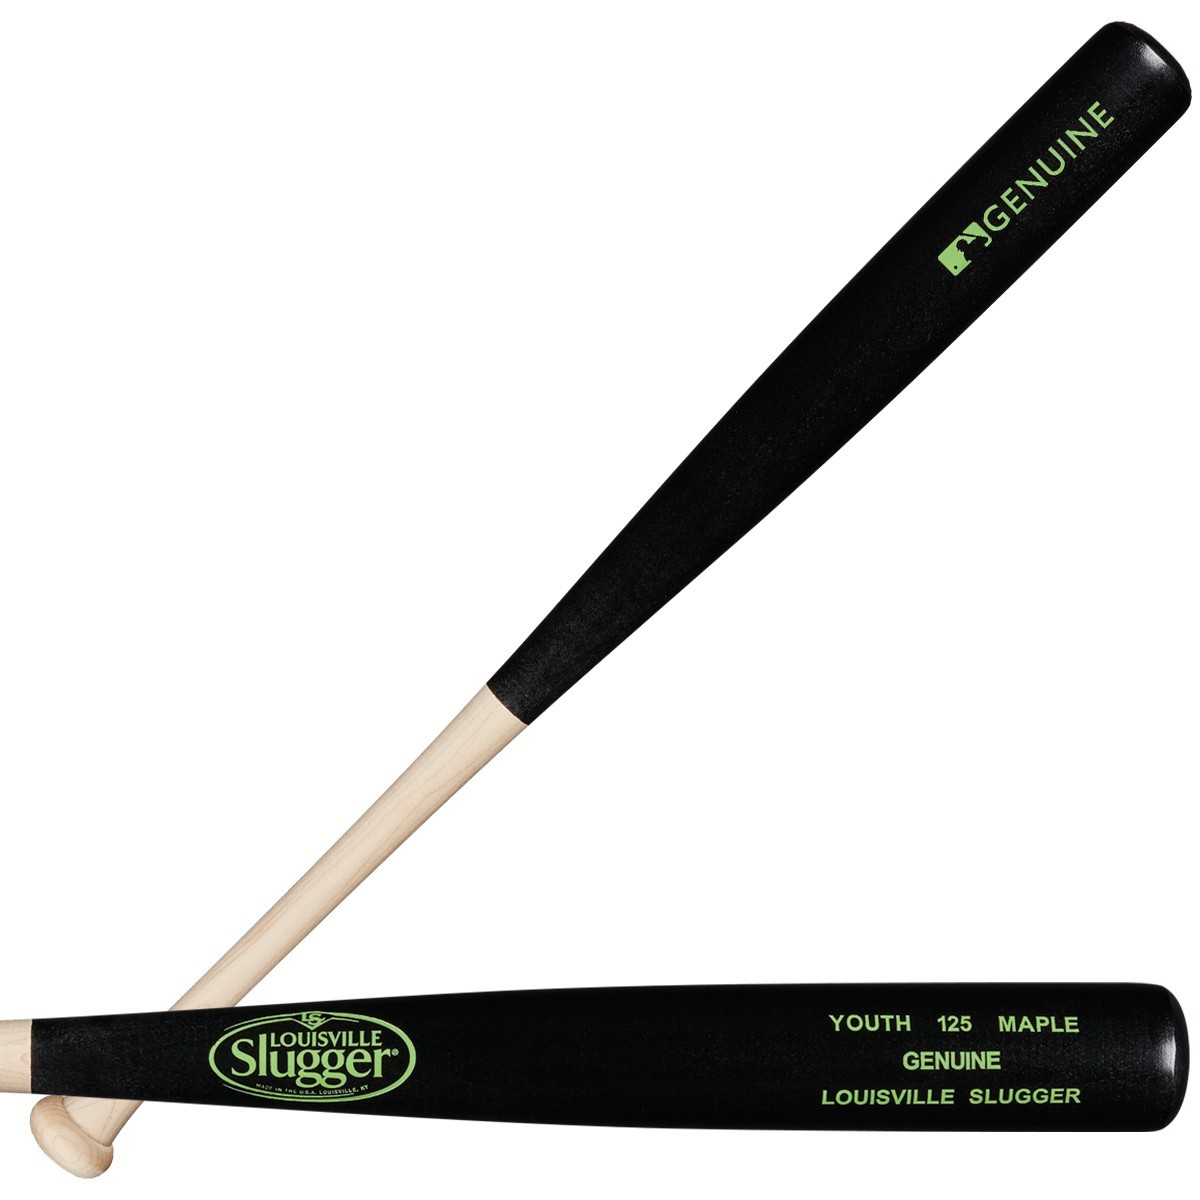 louisville-slugger-youth-125-maple-genuine-wood-baseball-bat-31-inch WTLWYM125A1631 Louisville 887768509071 <span>Priced for every budget and built from dependable maple wood youth